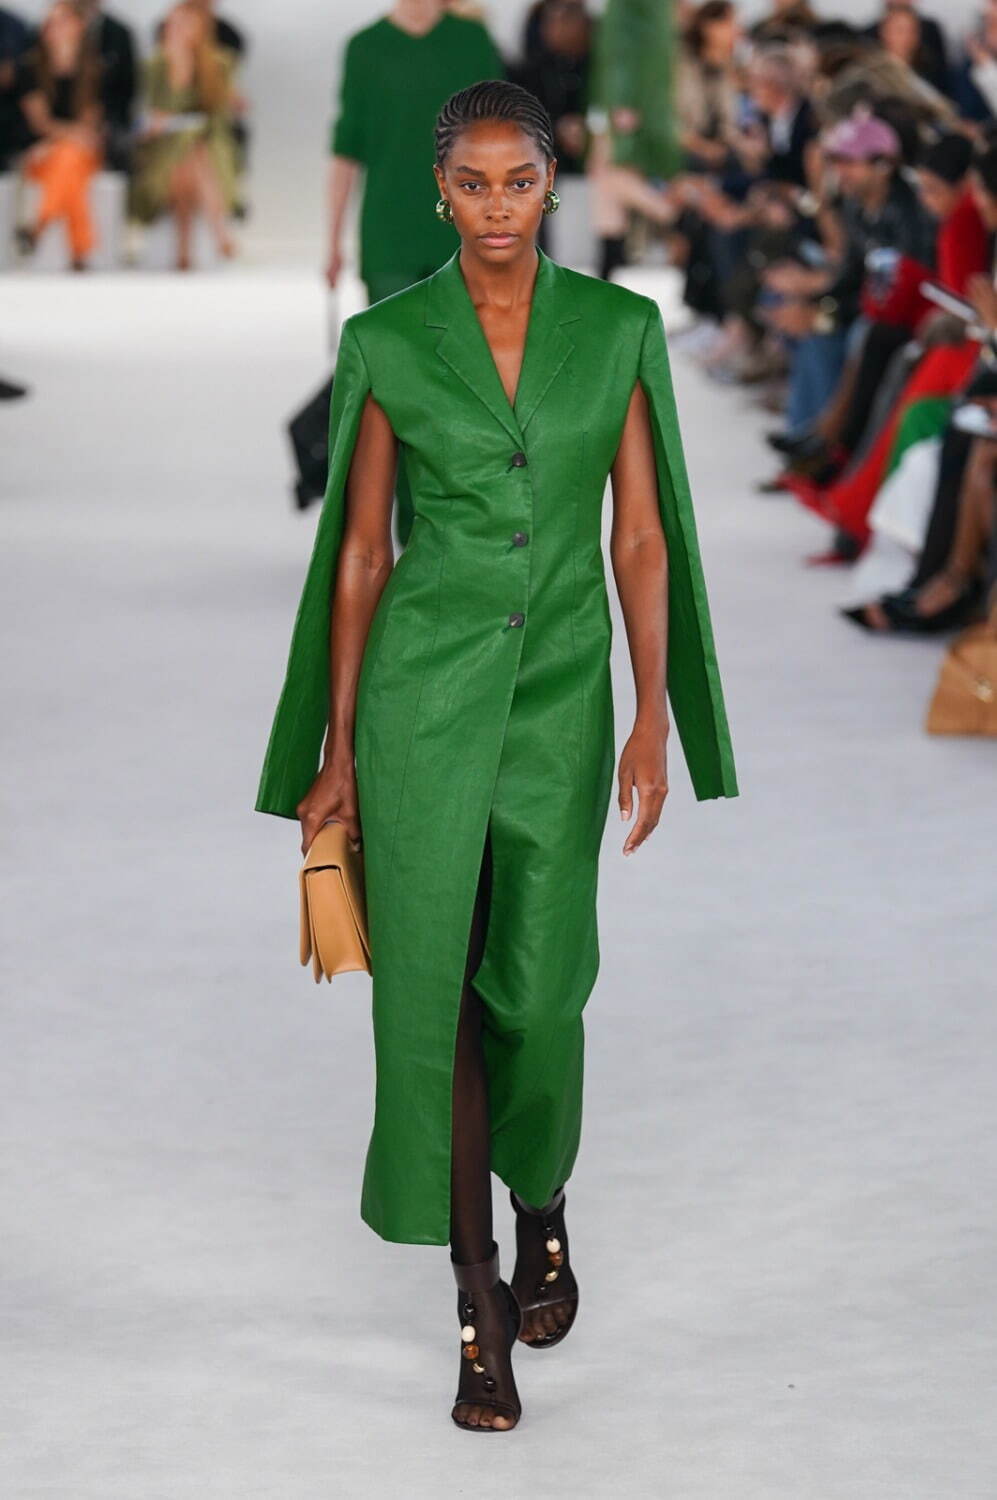 Ferragamo 2024 Spring Summer Womens Runway Looks, Fashion Forward Forecast, Curated Fashion Week Runway Shows & Season Collections, Trendsetting  Styles by Designer Brands